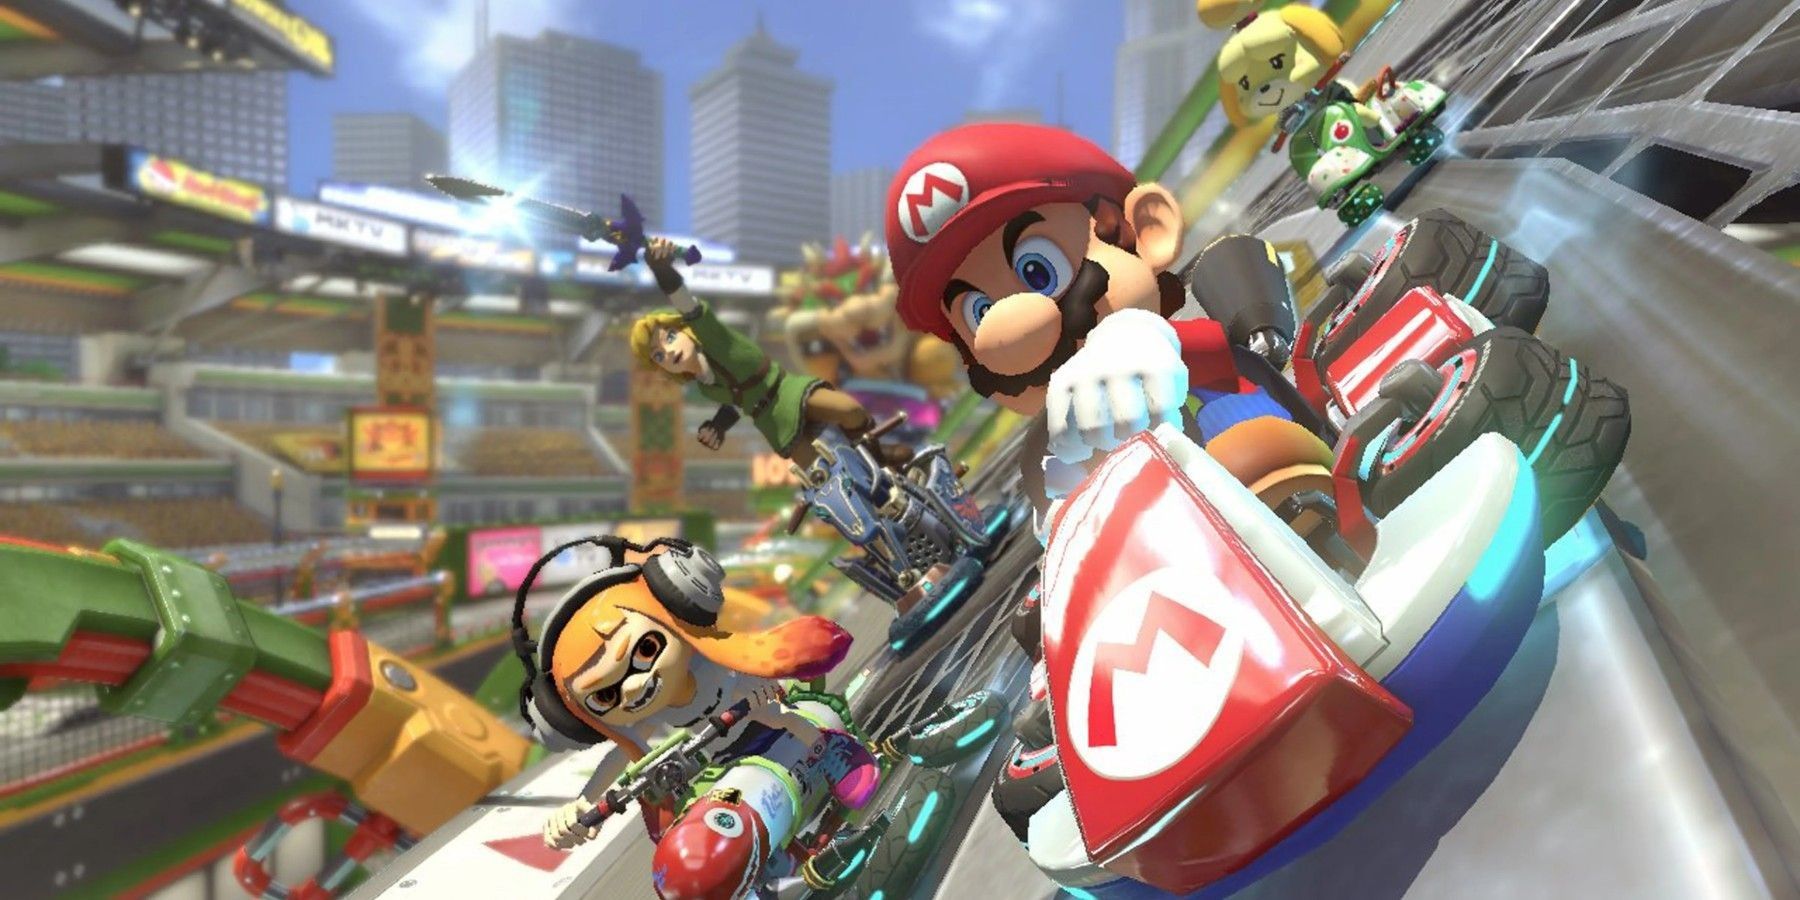 Mario Kart 8 Deluxe finally lets players customize items